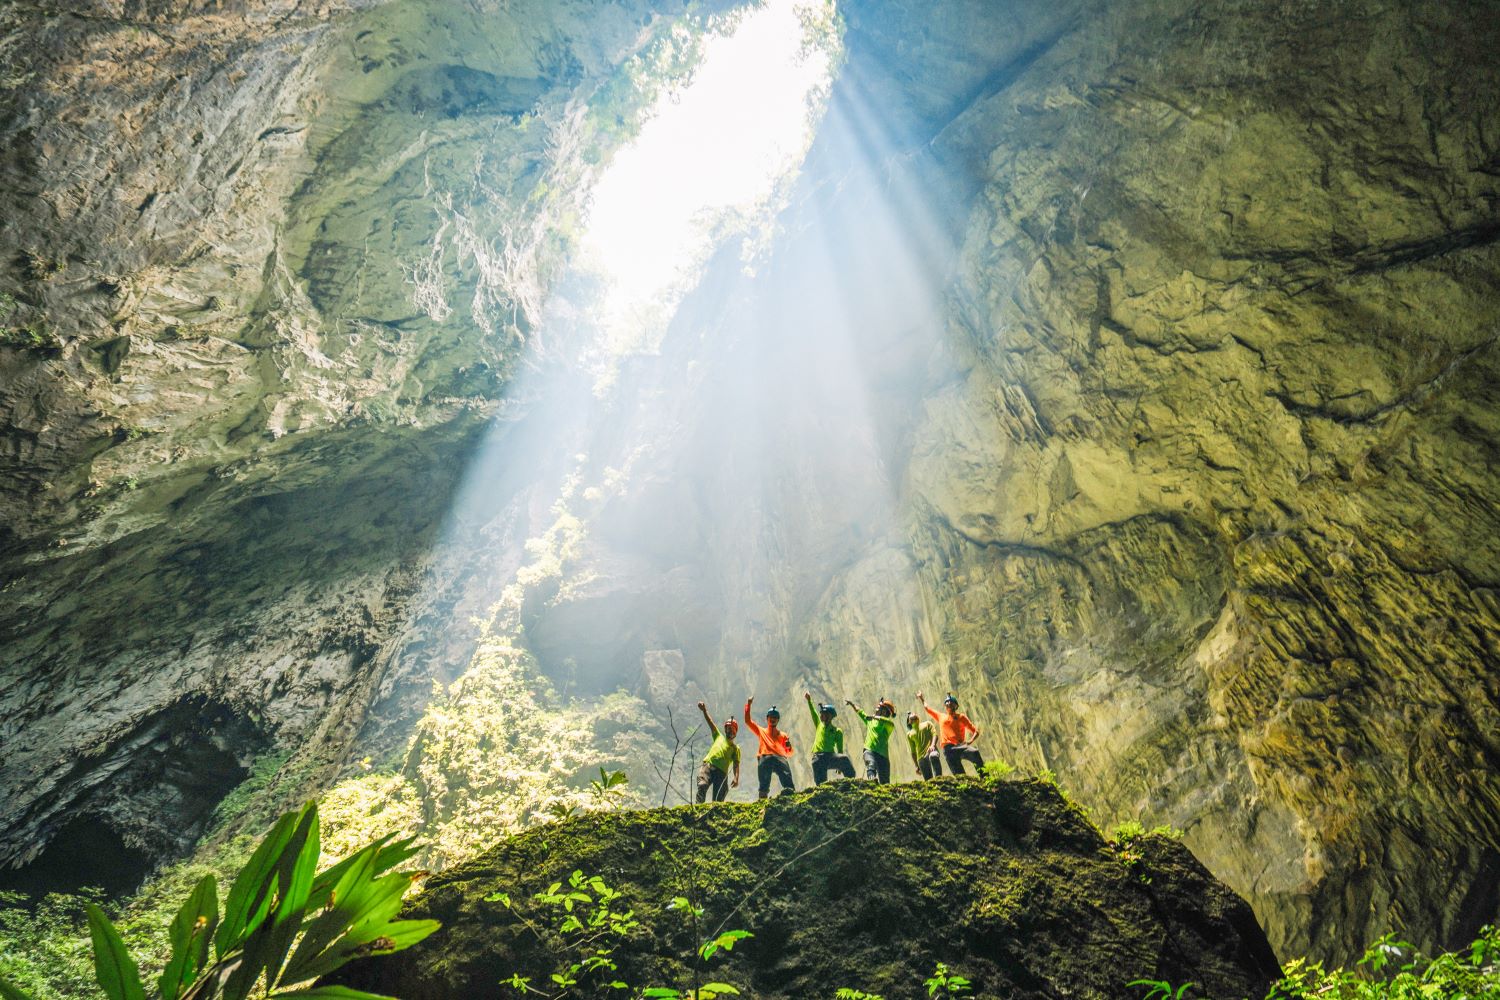 The sunbeam streams into the Doline 1 of Hang Son Doong, illuminating the cave’s vastness and beauty.